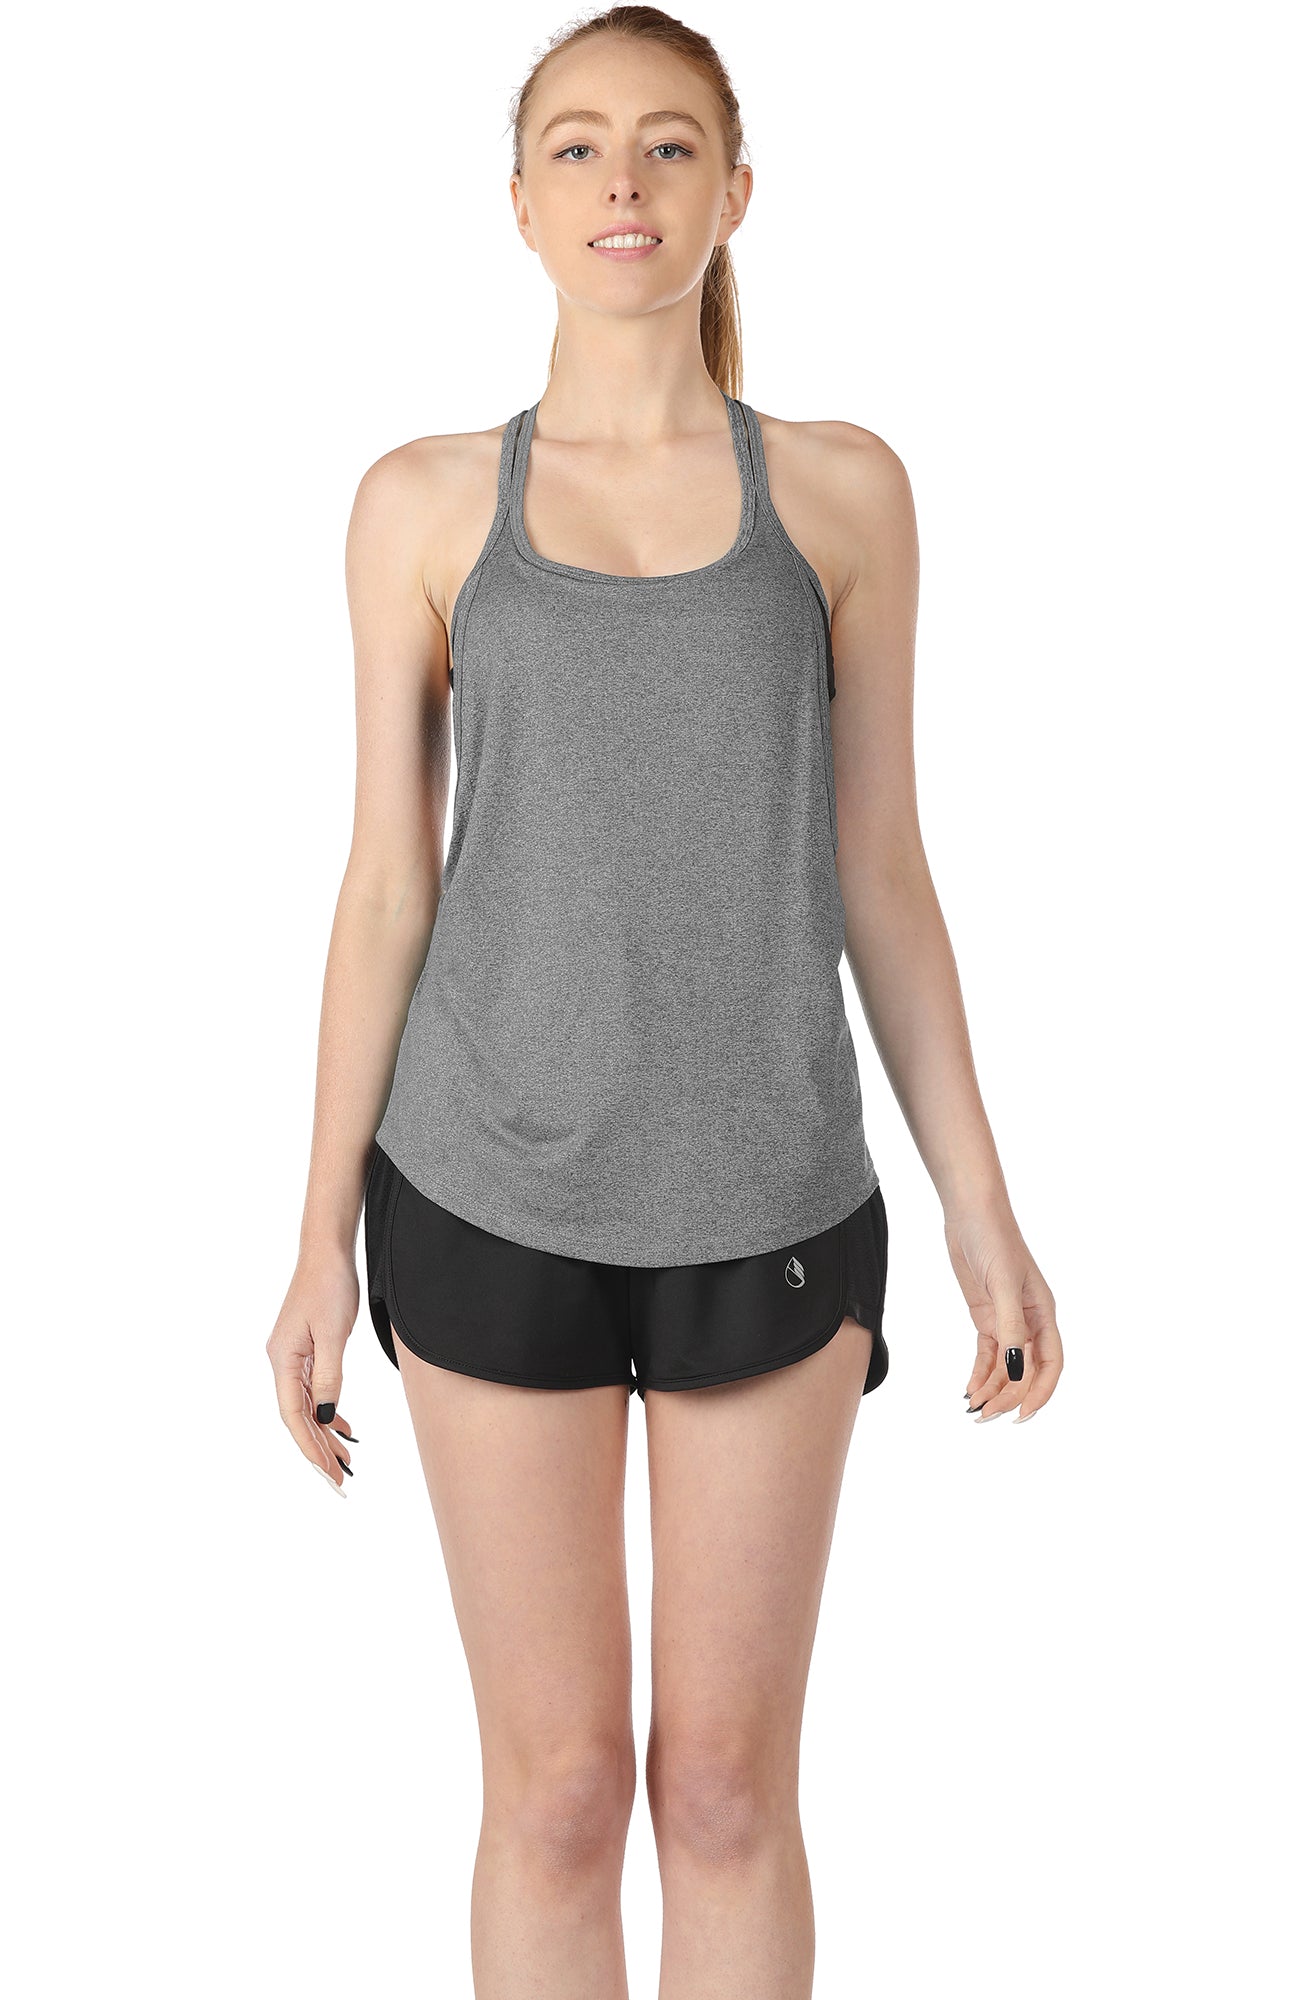 Workout Tops for Women Yoga Tank Tops with Built in Bra Wirefree Padded  Yoga Bras Gym Running Athletic Shirt V-Neck Camisole Dark Grey at  Women's  Clothing store